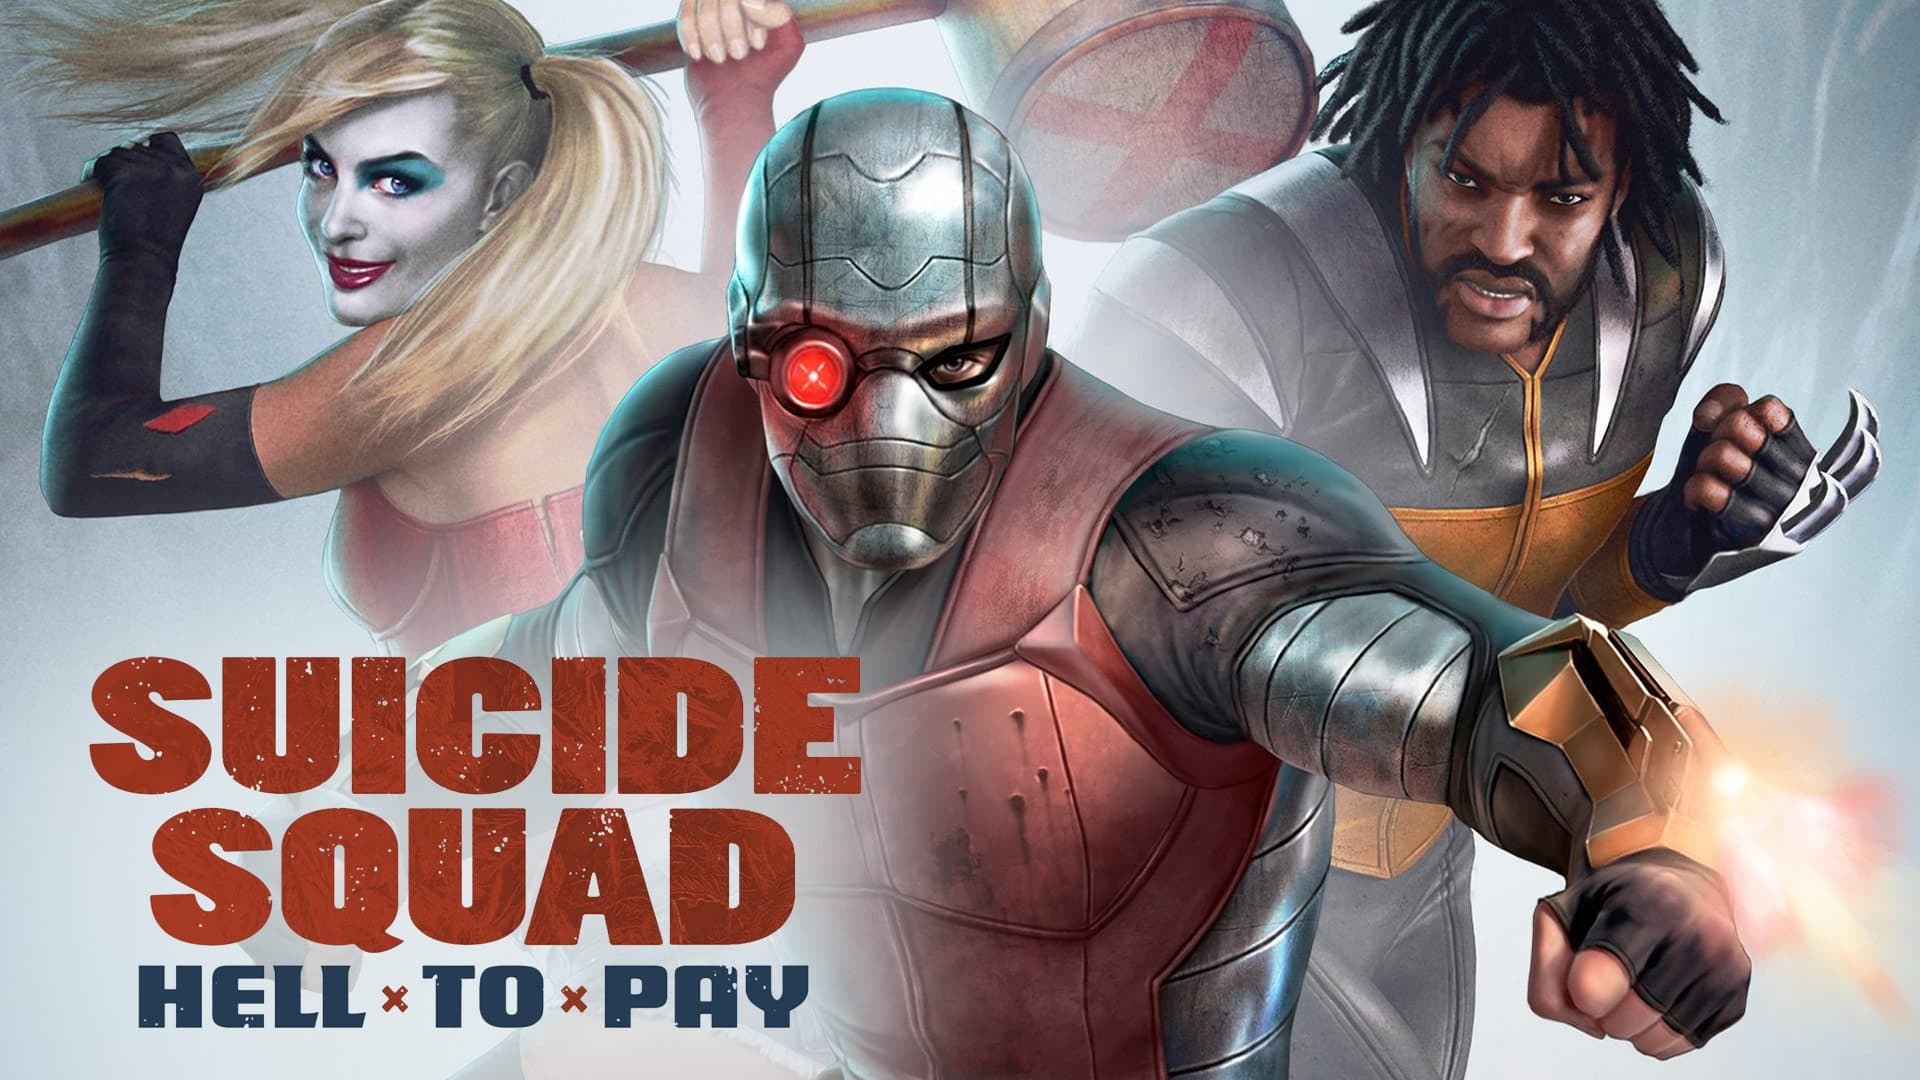 Suicide Squad: Hell to Pay (2018)